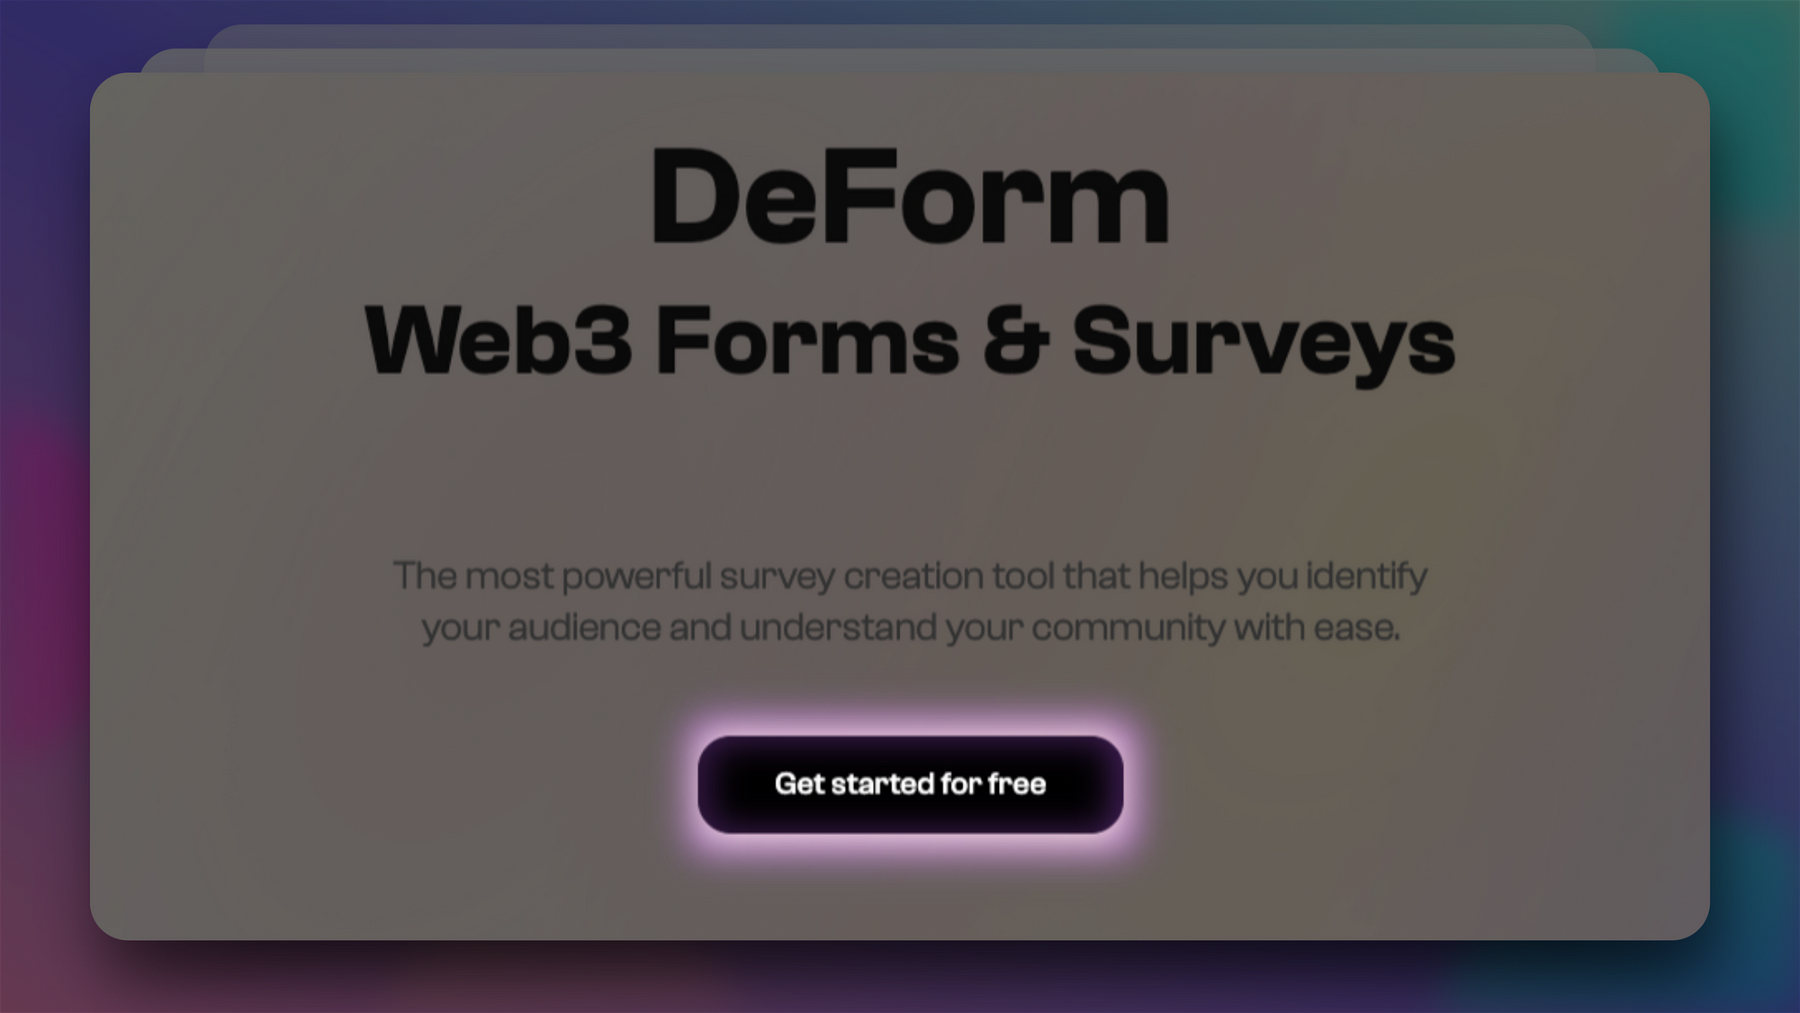 One of the quickest ways to login or sign up on DeForm is by using the Get started for free button located near the center of the website!